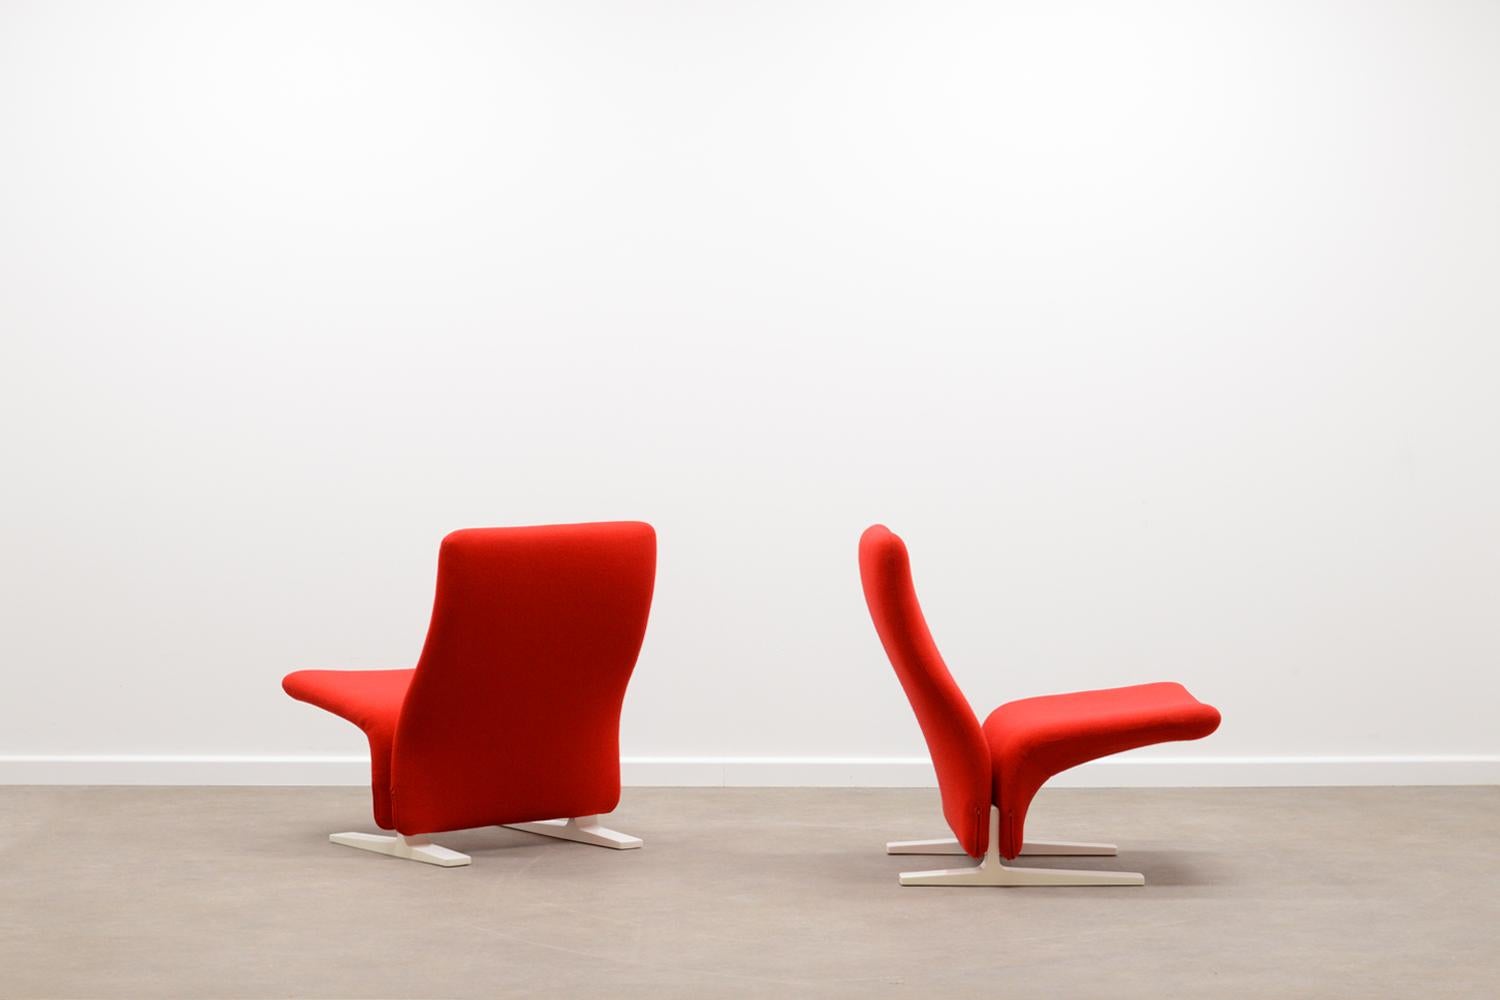 Set of 2 Concorde chairs or F789 from Pierre Paulin for Artifort 60s. The chair was originally designed for the waiting room of the Concorde plain. White laquerd aluminum legs and original red fabric. In very good vintage condition. 

 